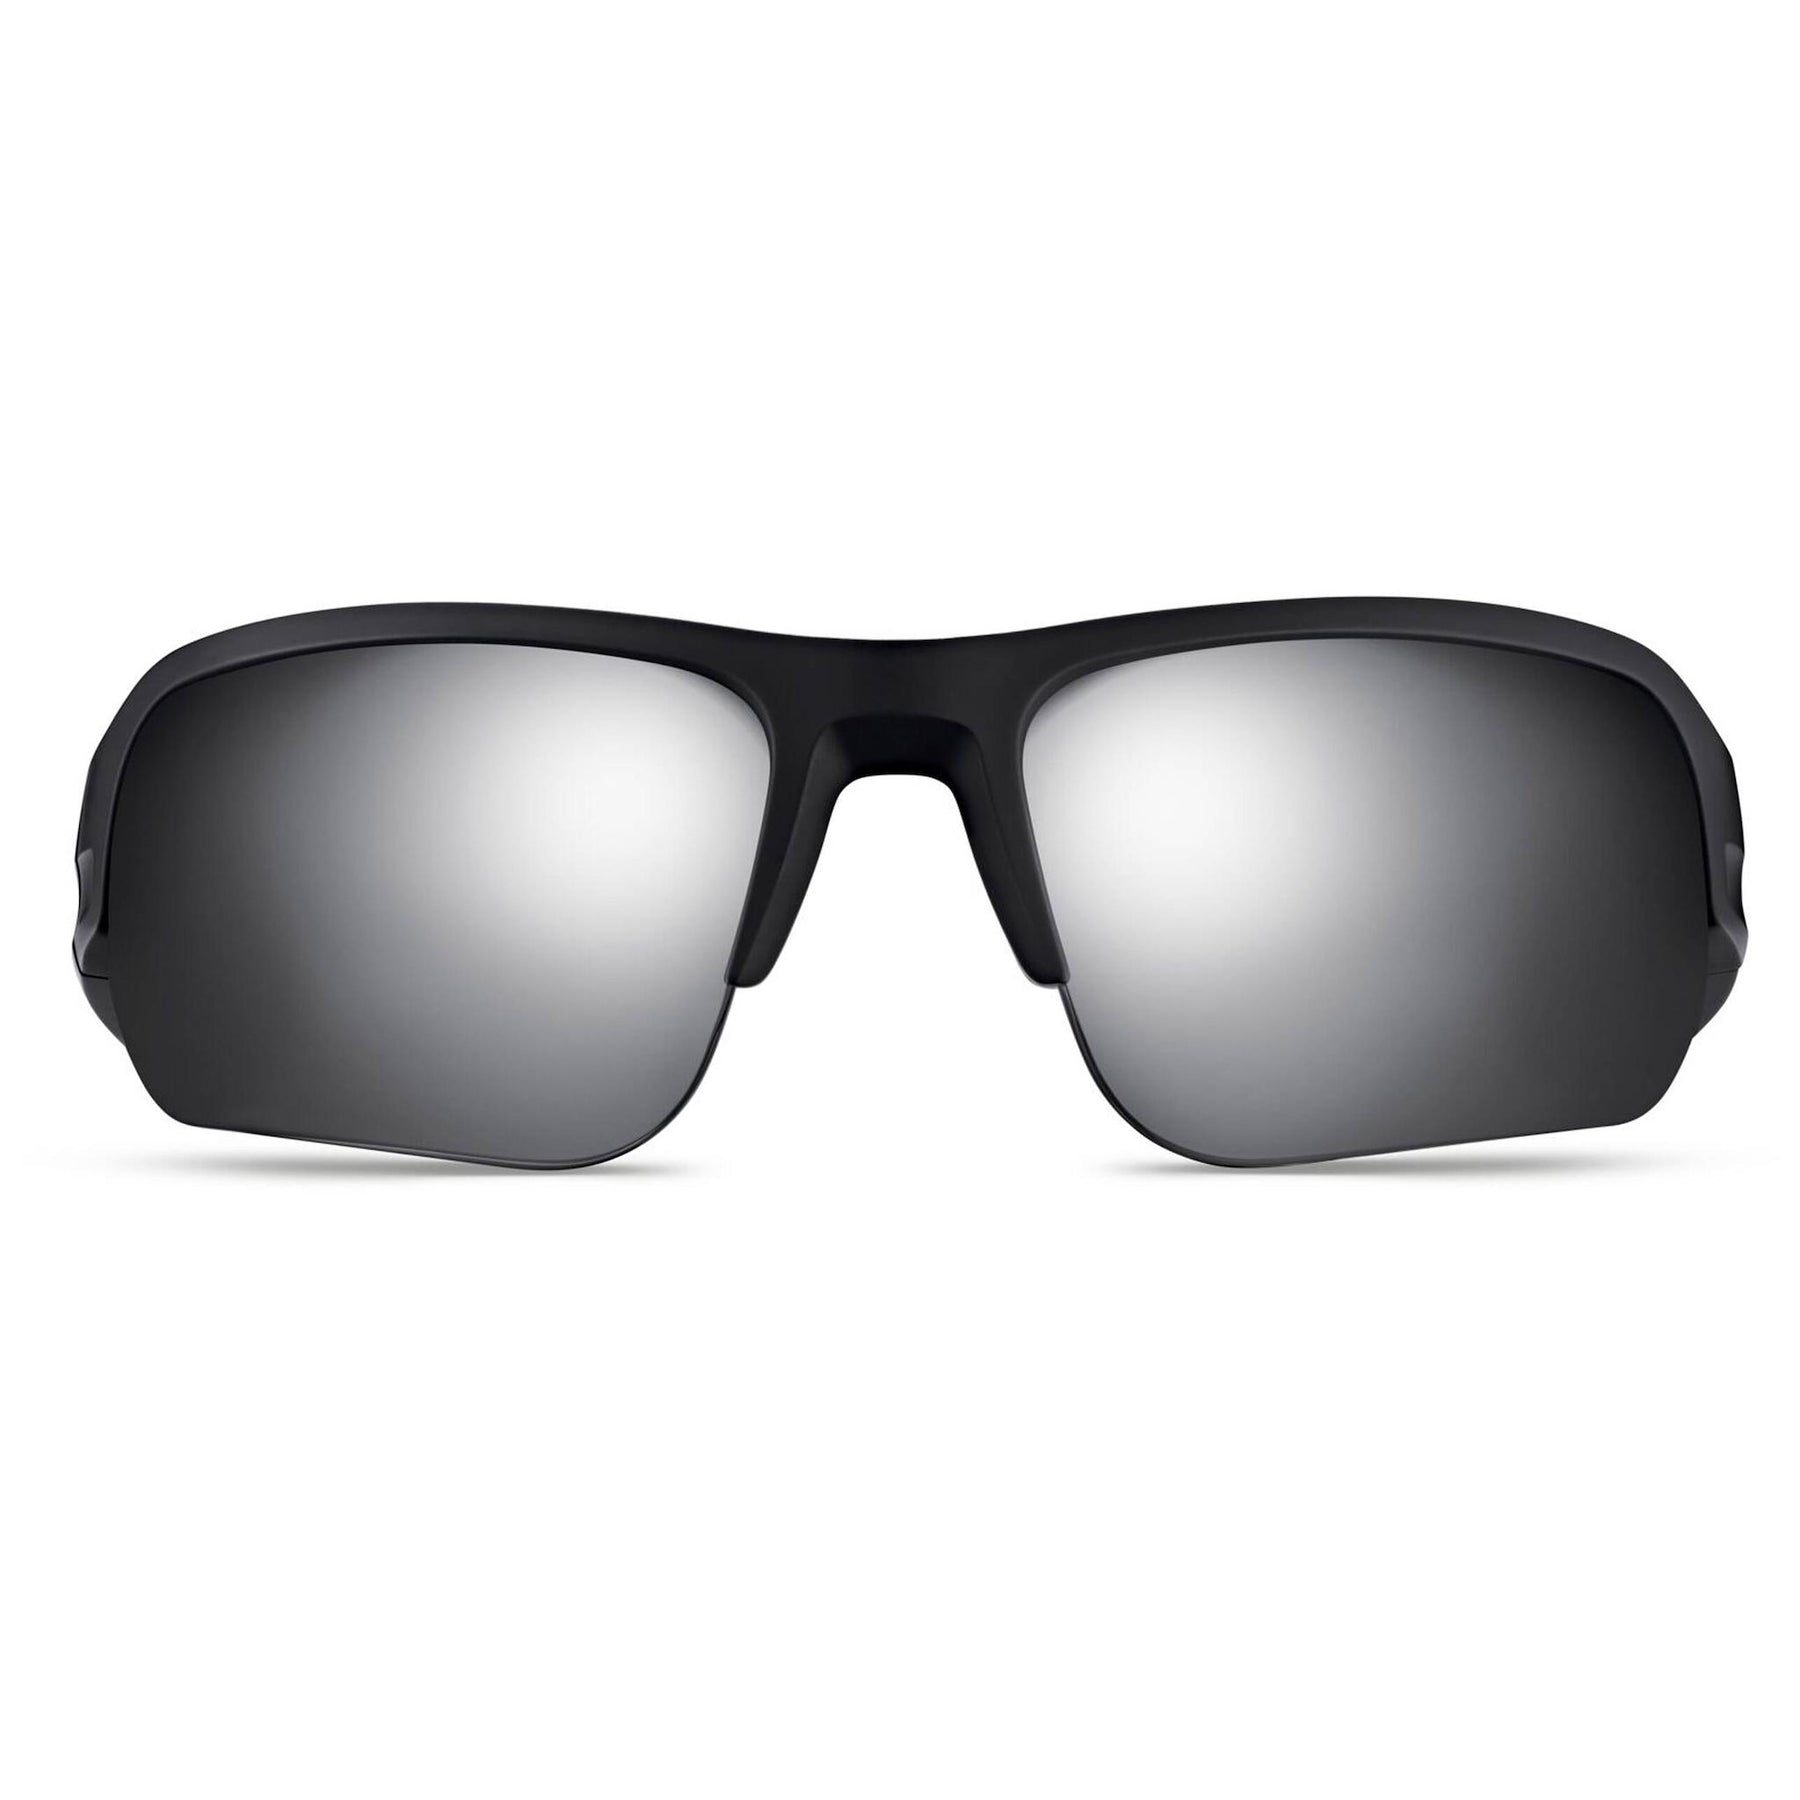 Bose Frames Review: These Smart Sunglasses Have Serious Sound - YouTube